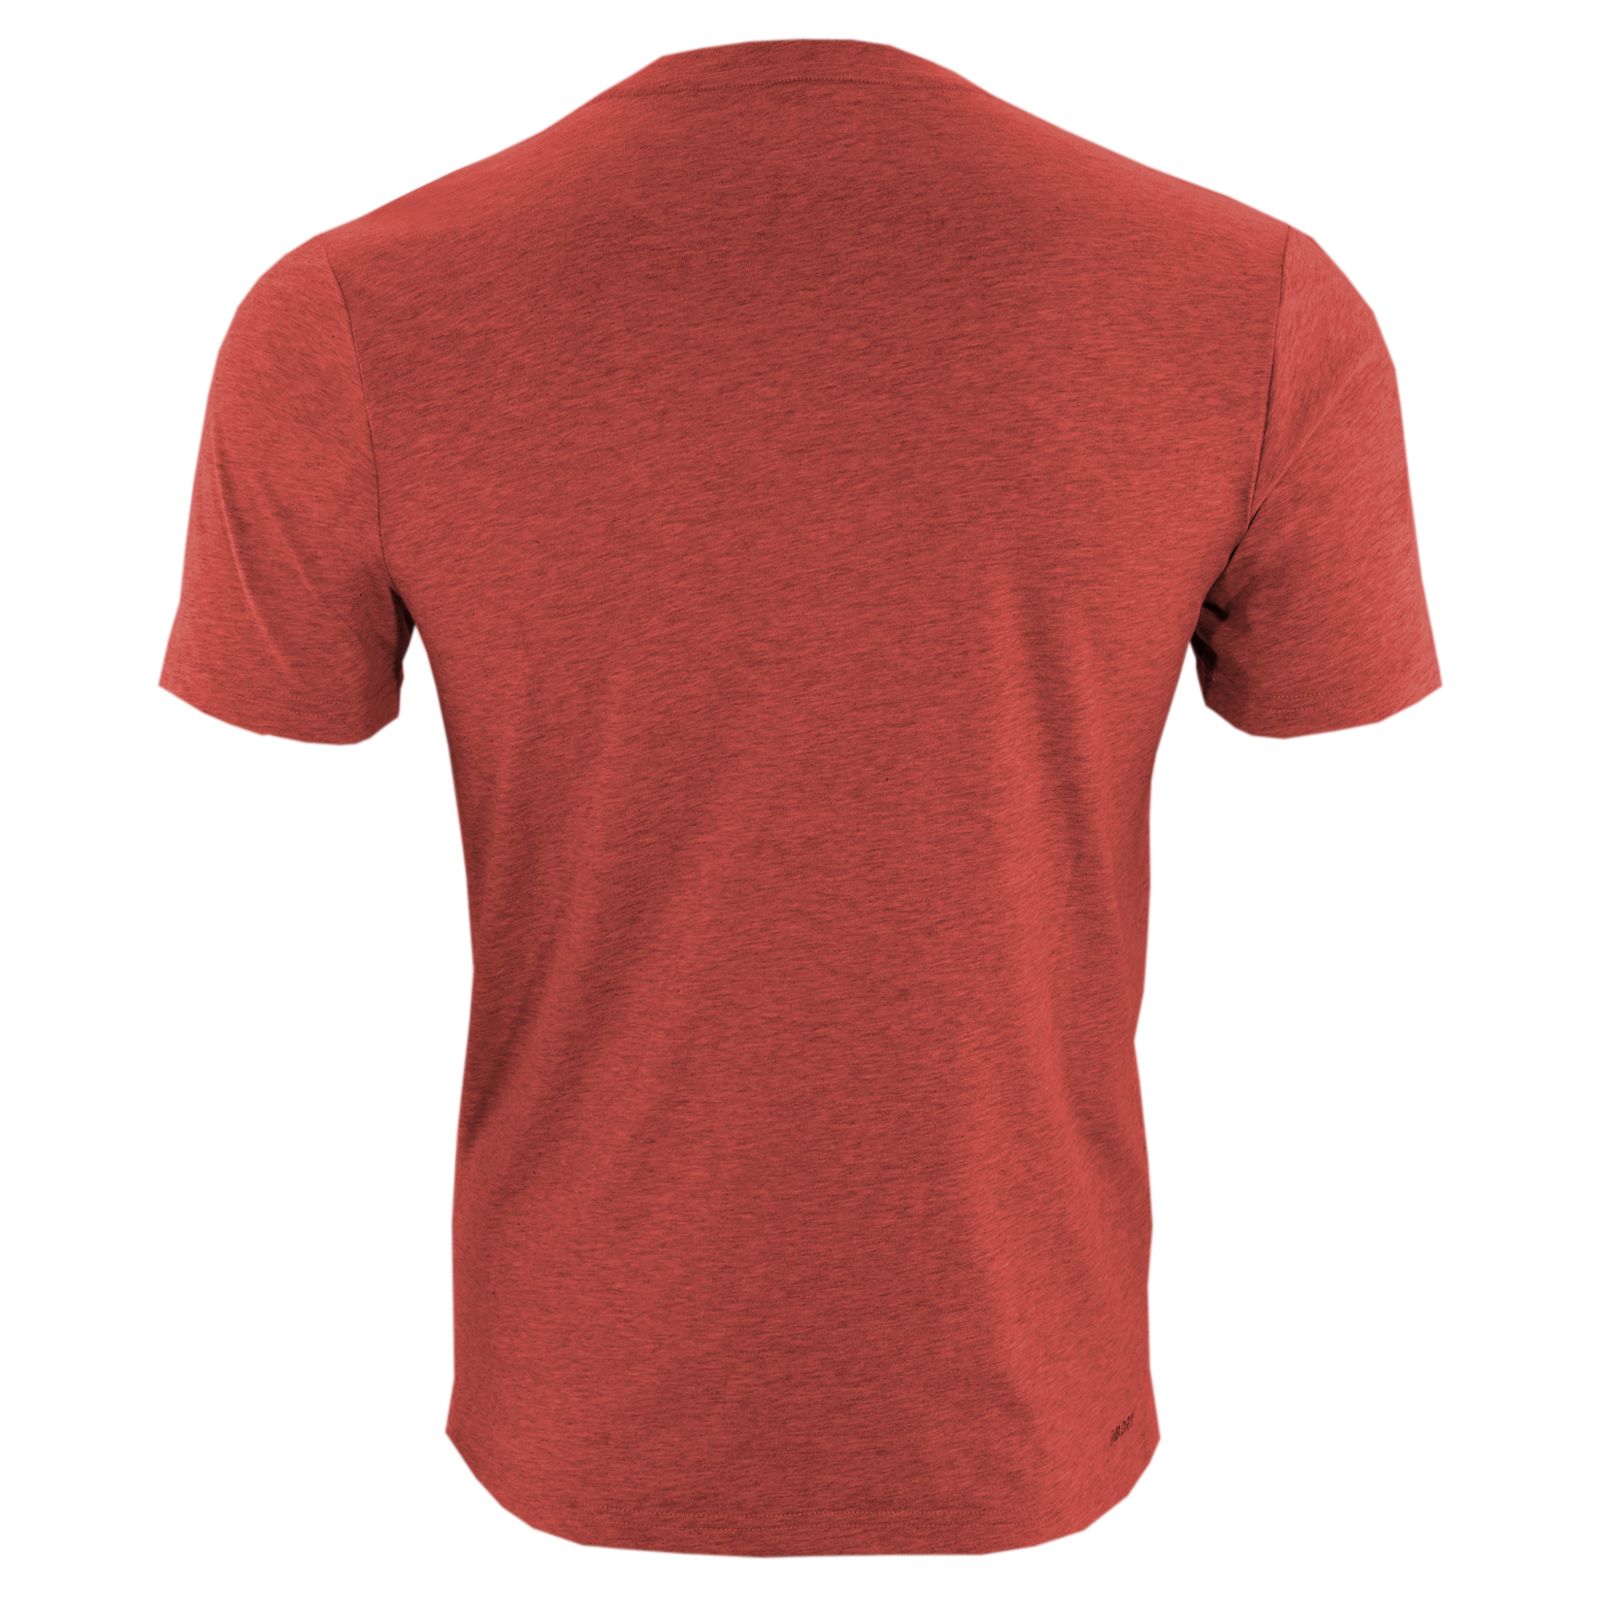 Heather Tech Tee, Red Heather image number 2